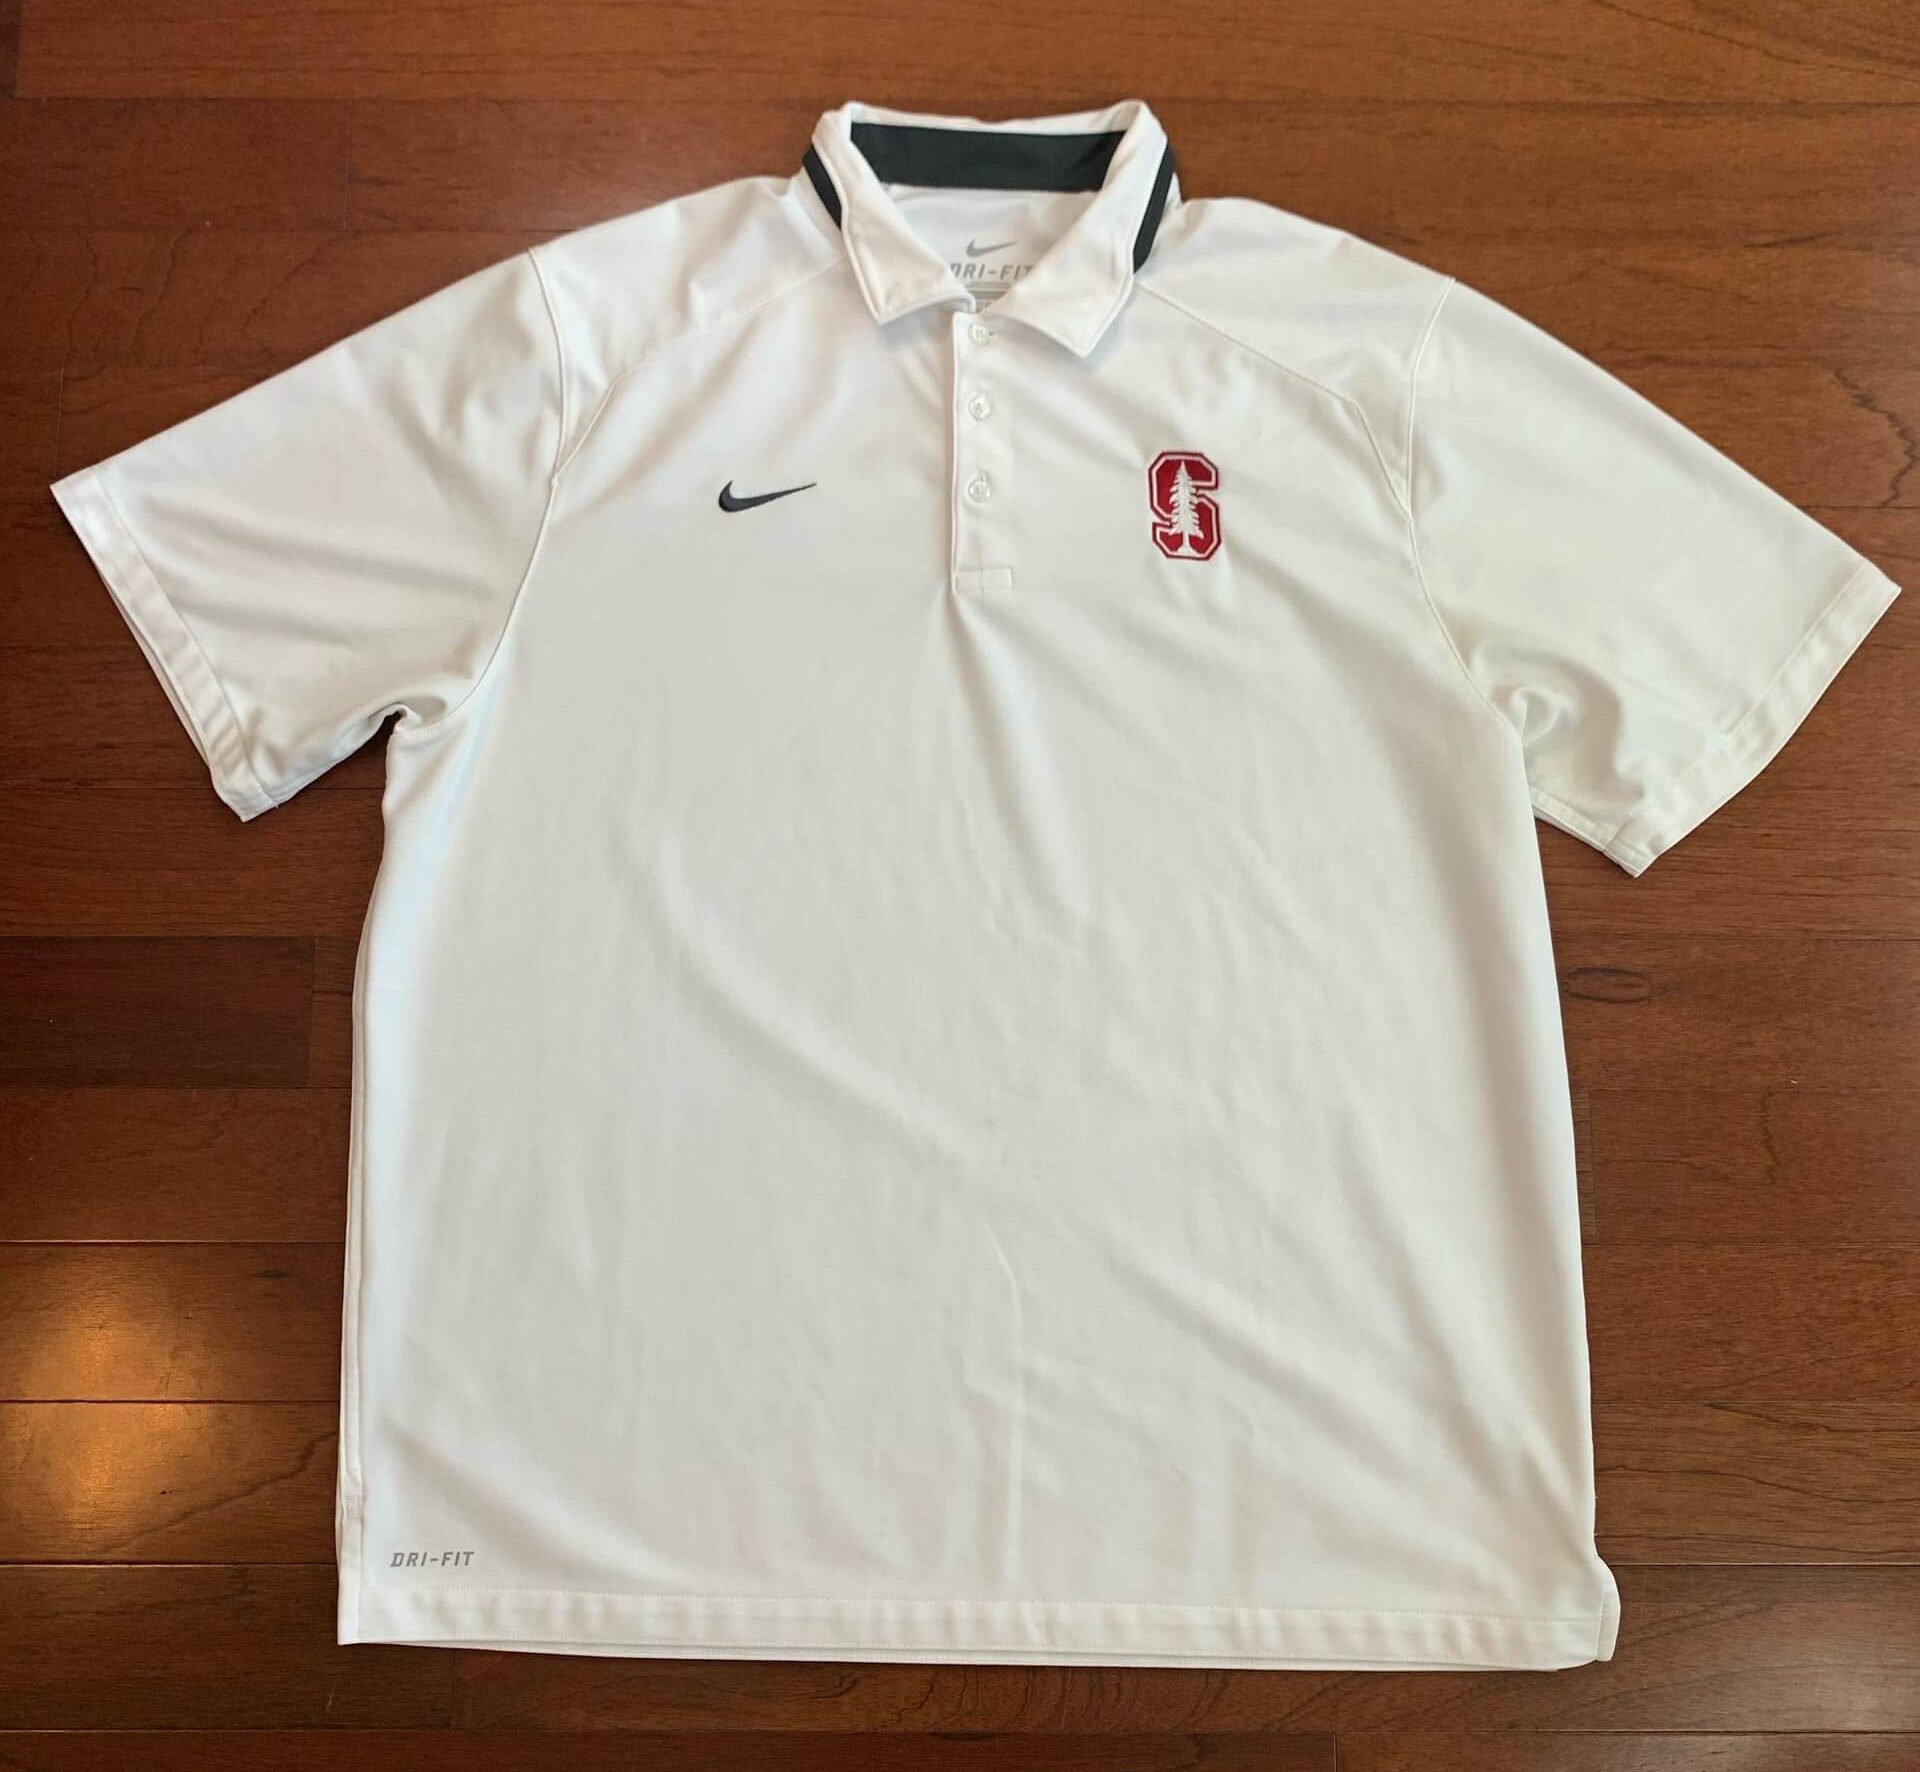 Stanford Dri-Fit Polo : NARP Clothing